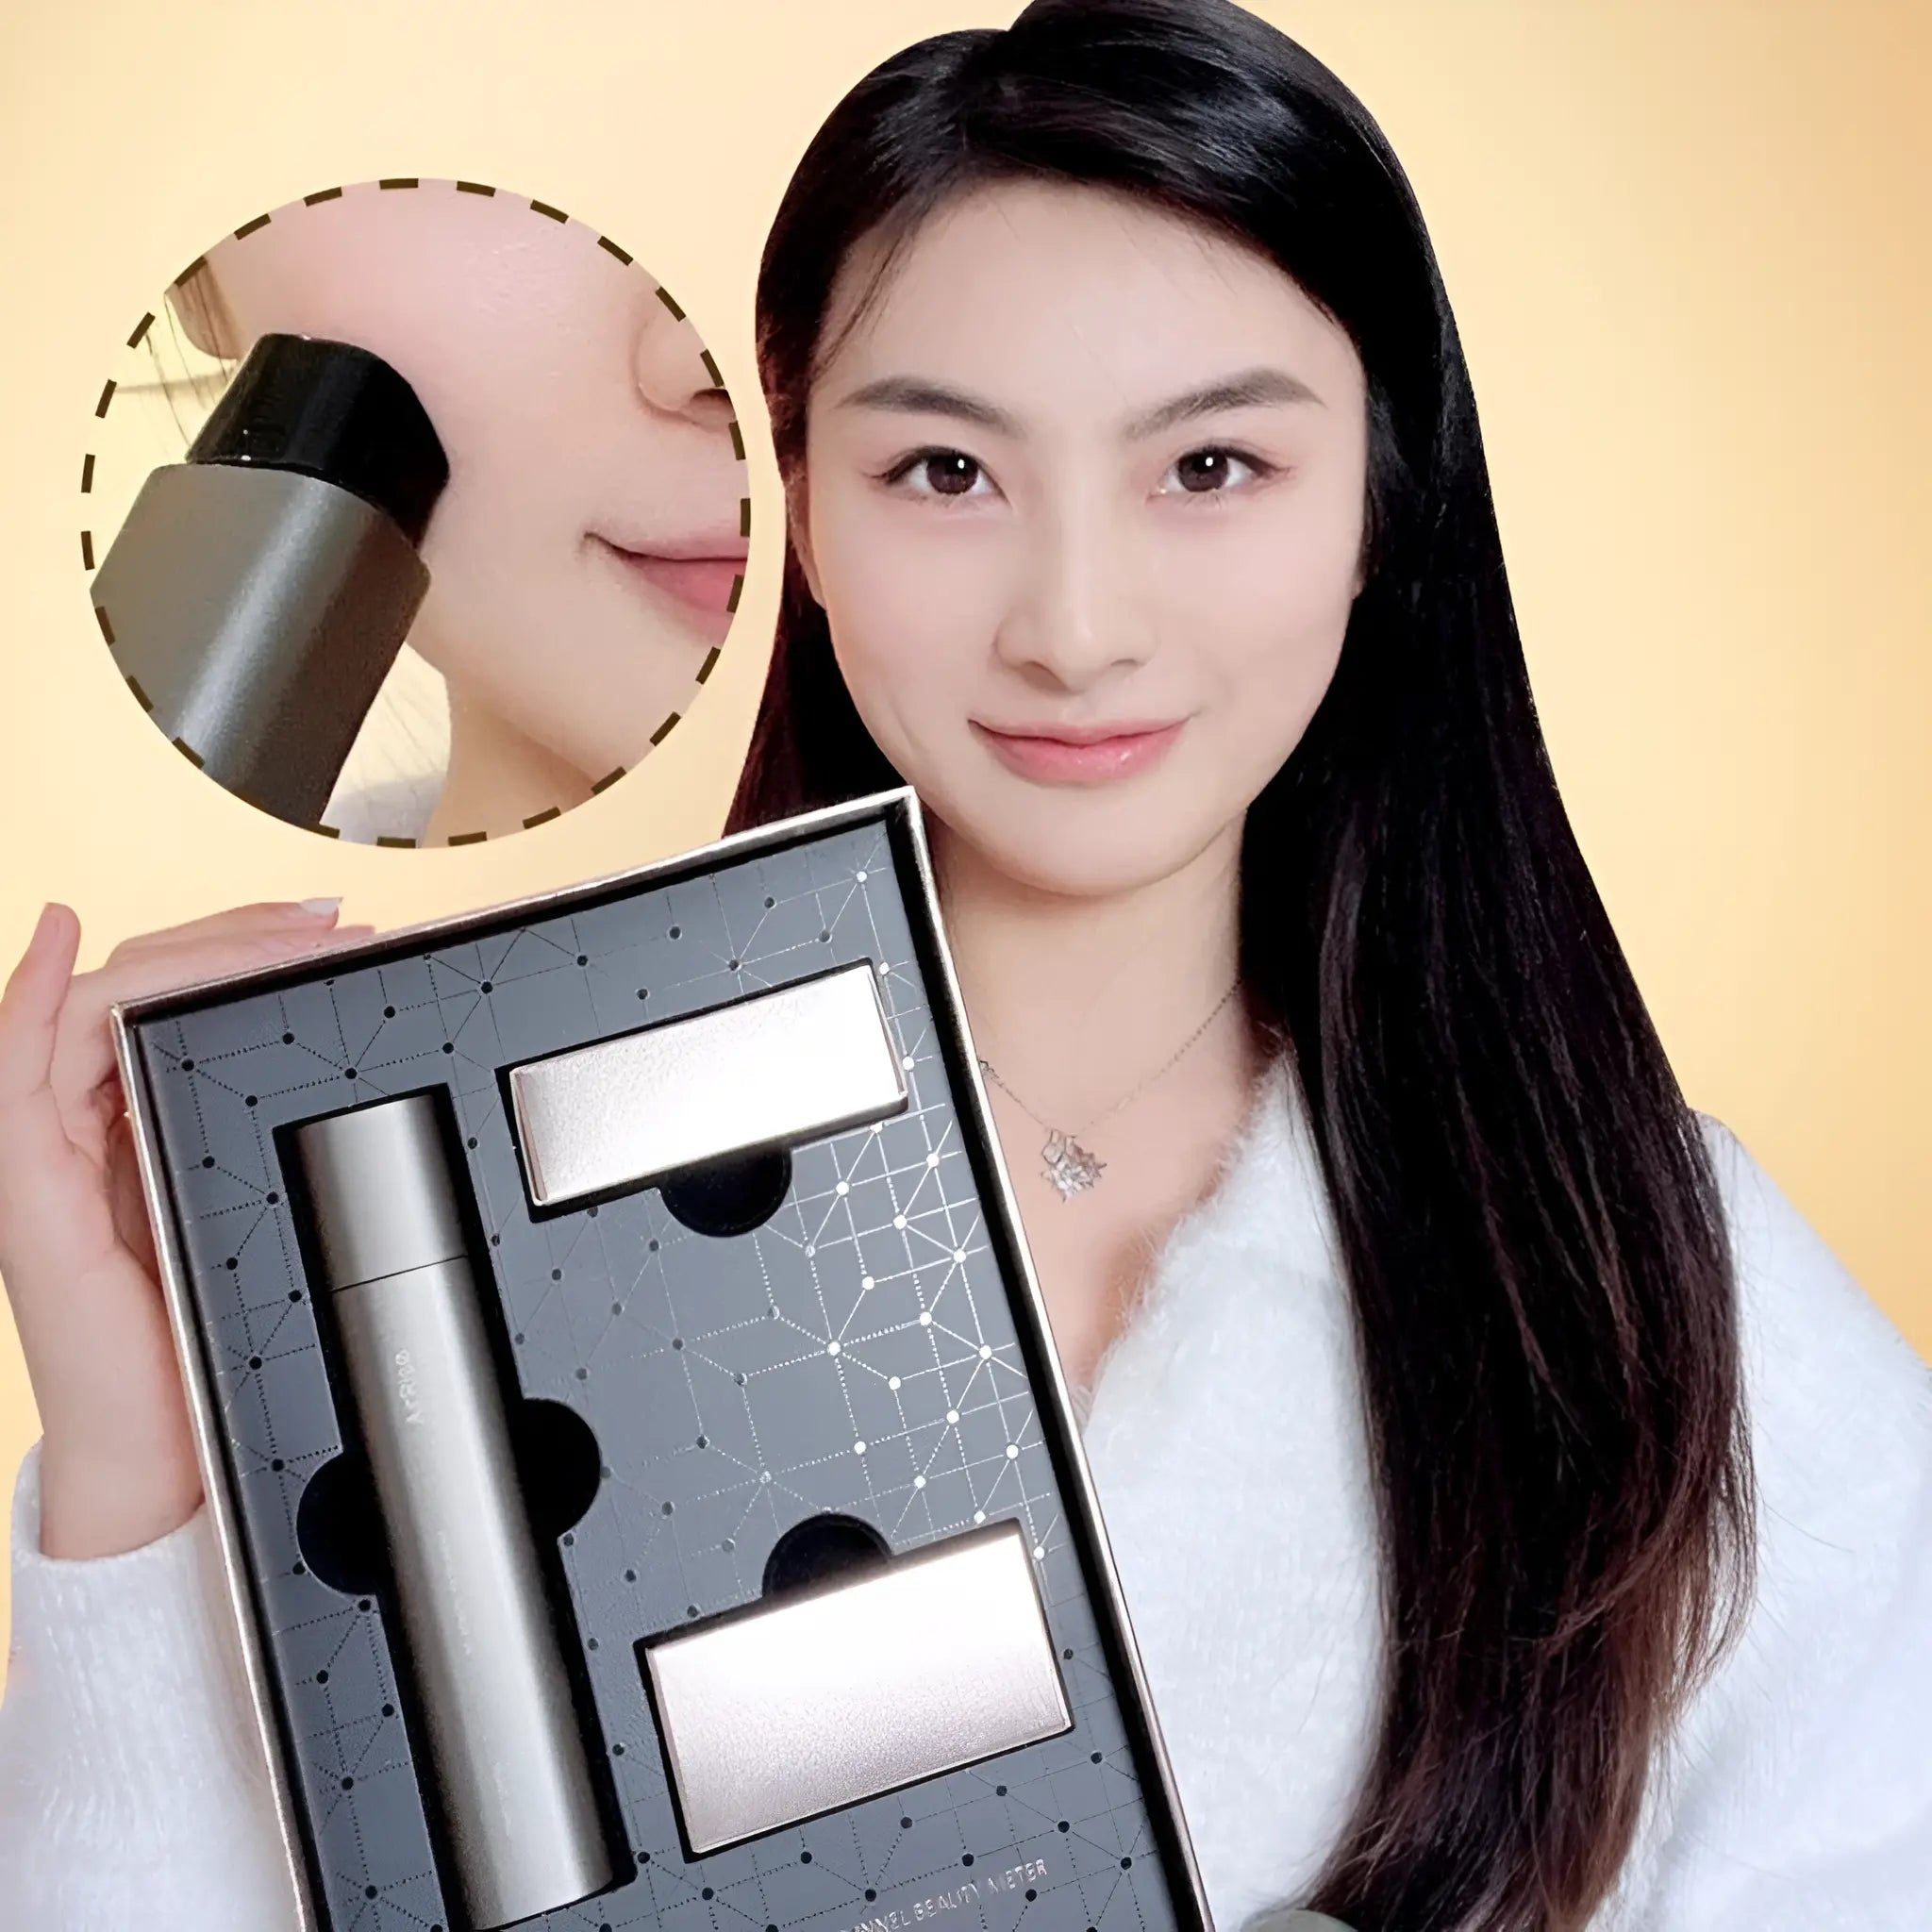 Facial RF Skin Tightening Device Combats Signs Of Aging